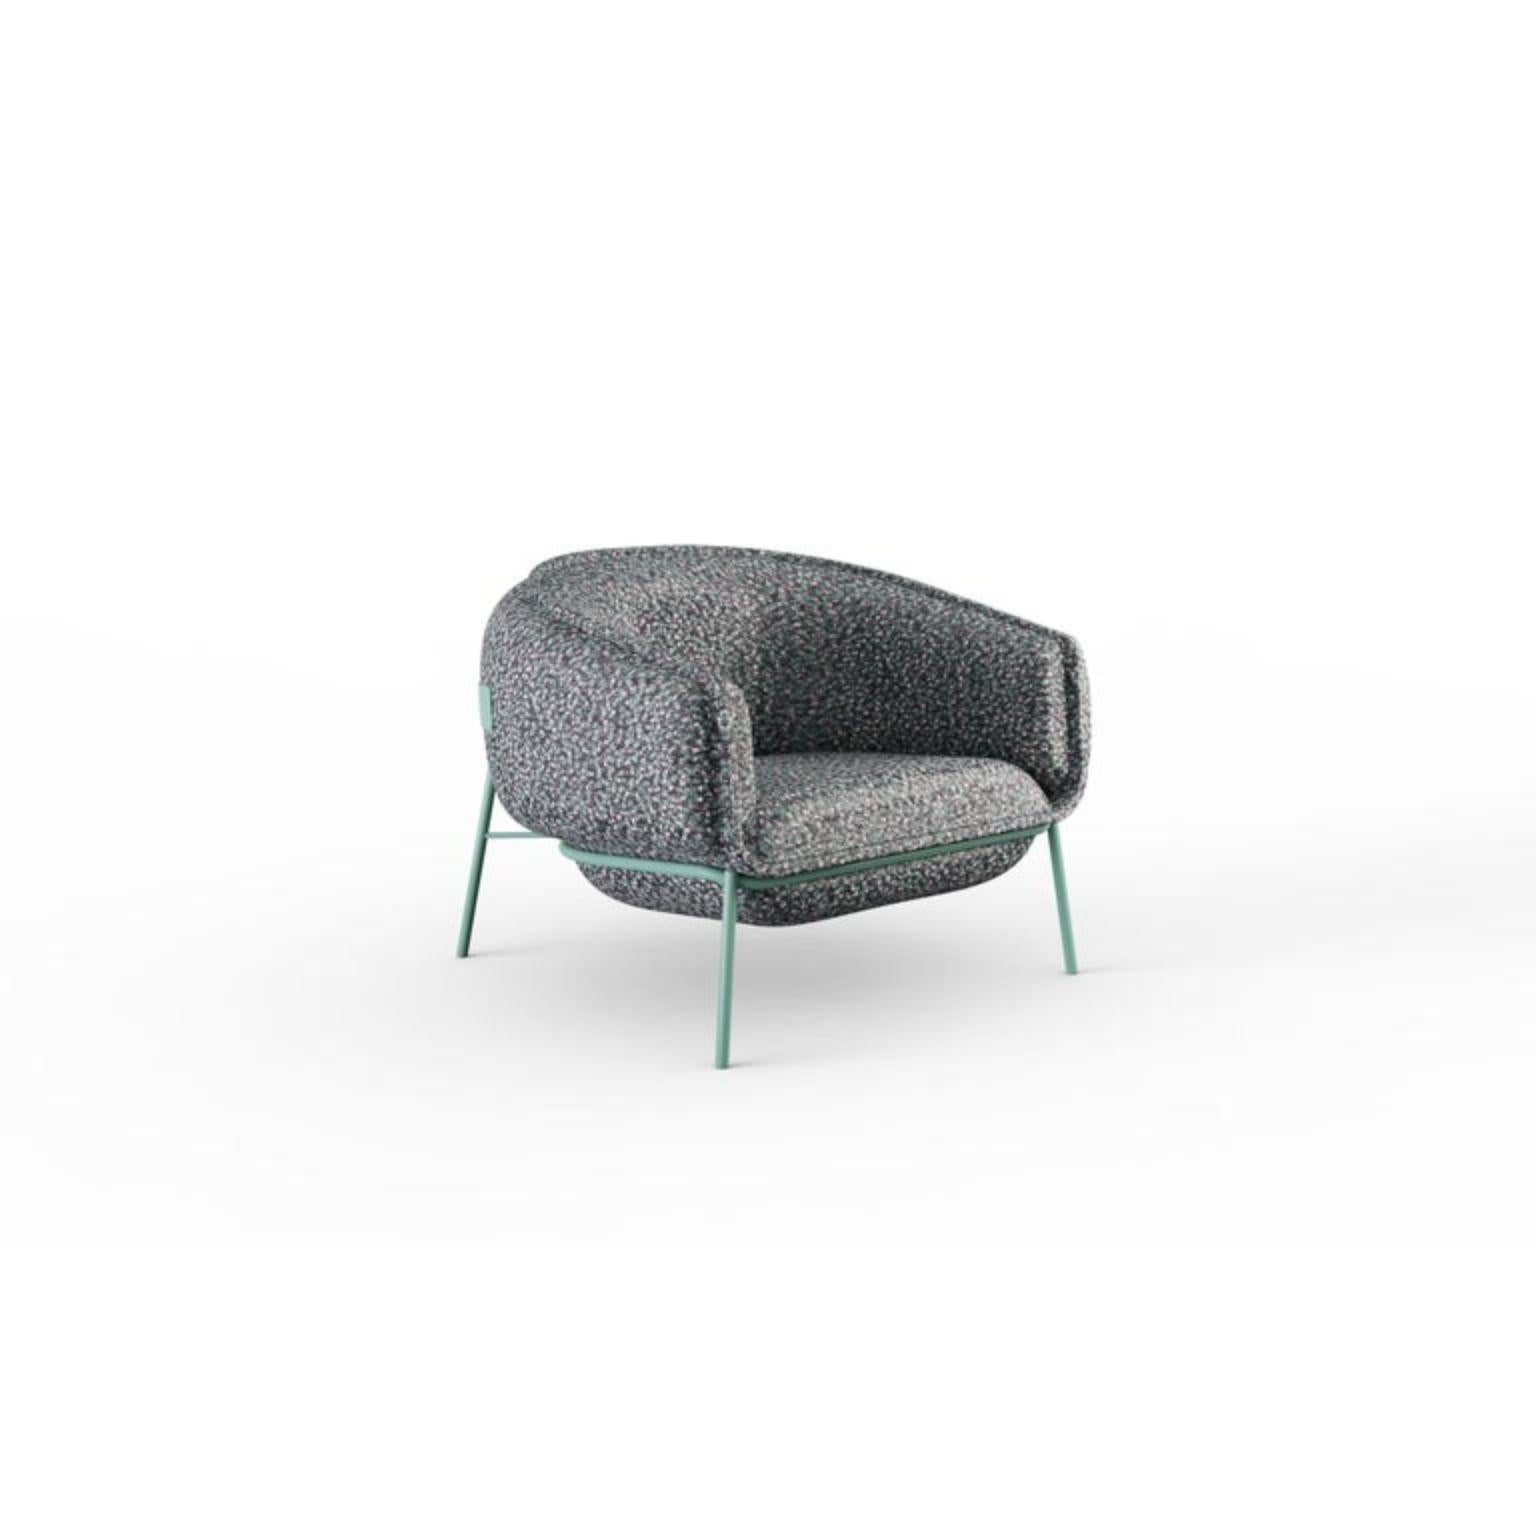 Contemporary fabric Blop armchair
Dimensions: D 78 x W 80 x H 75 cm
Seat height 44 cm
Materials: Top: fabric or leather
Feet: Lacquer metal - choose from metal samples.




  